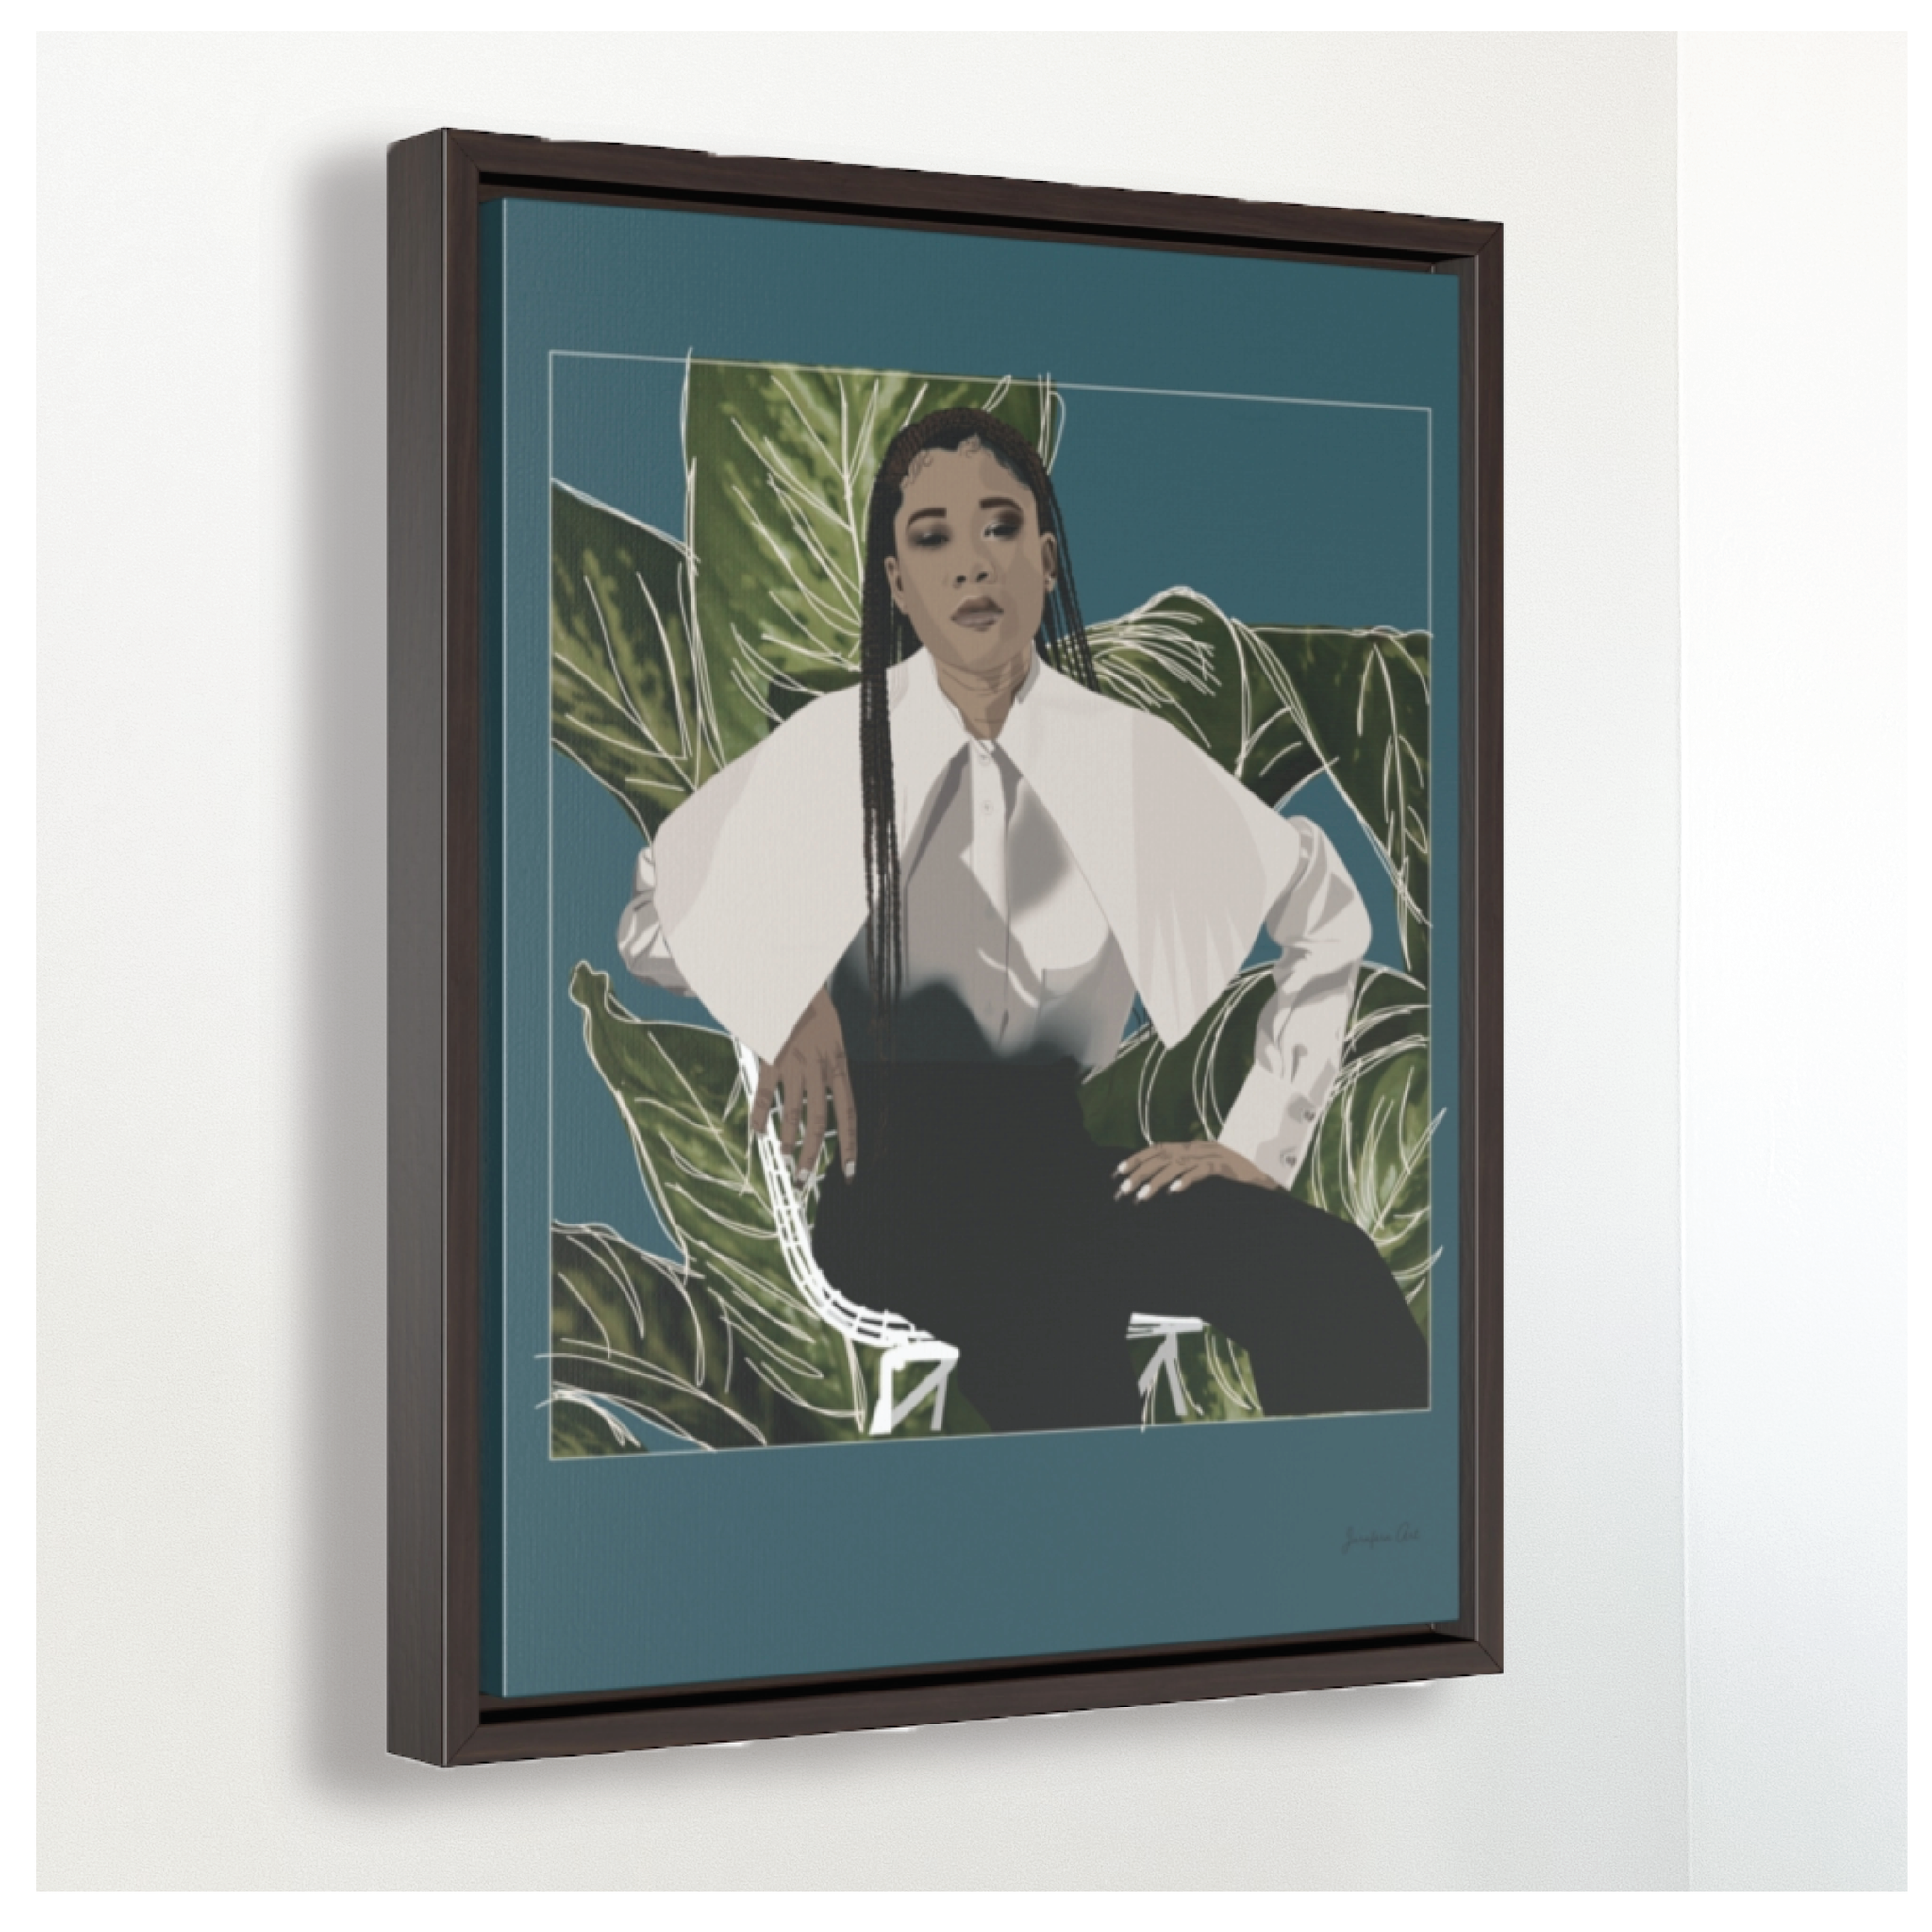 A large framed canvas illustration with a teal background and a digital illustration of actress Storm Reid posing in a chair and wearing a white blouse and black trousers, with a cut-out photo of leaves behind her